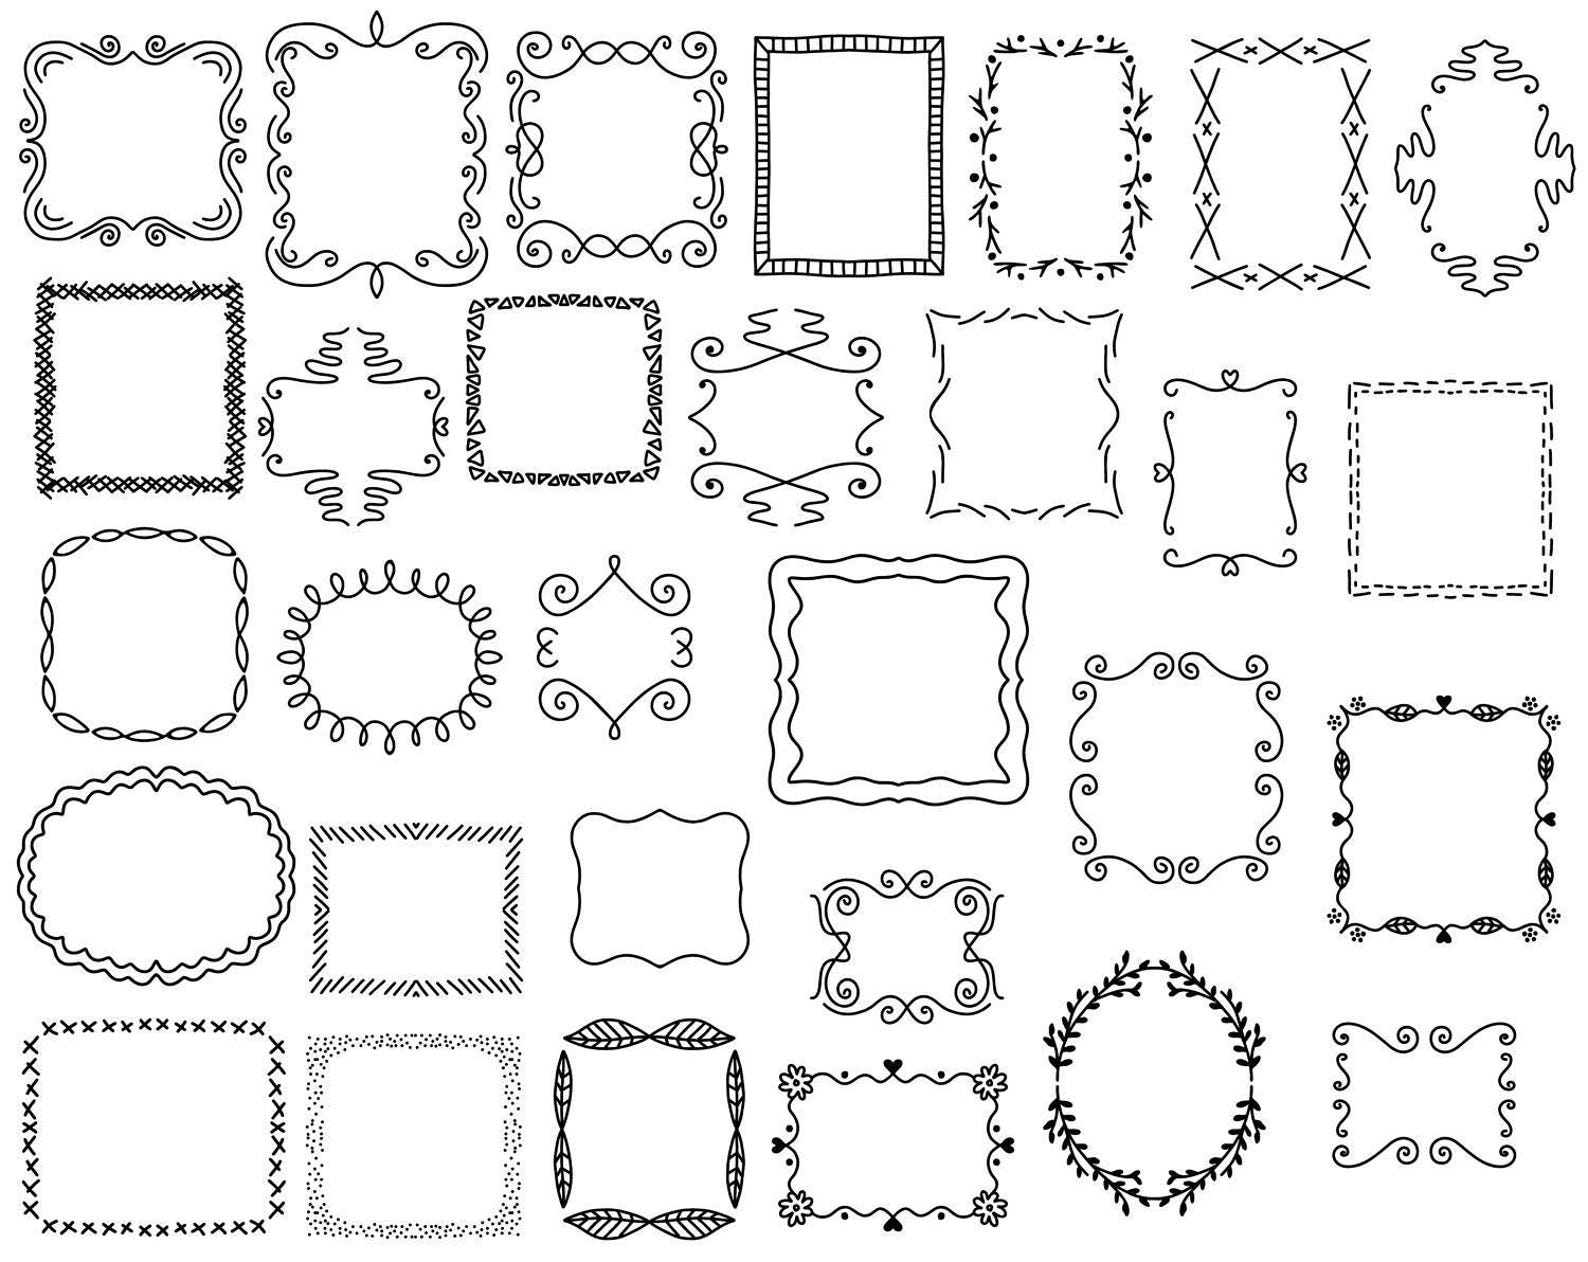 30-doodle-frames-vector-pack-hand-drawn-doodle-clipart-hand-etsy